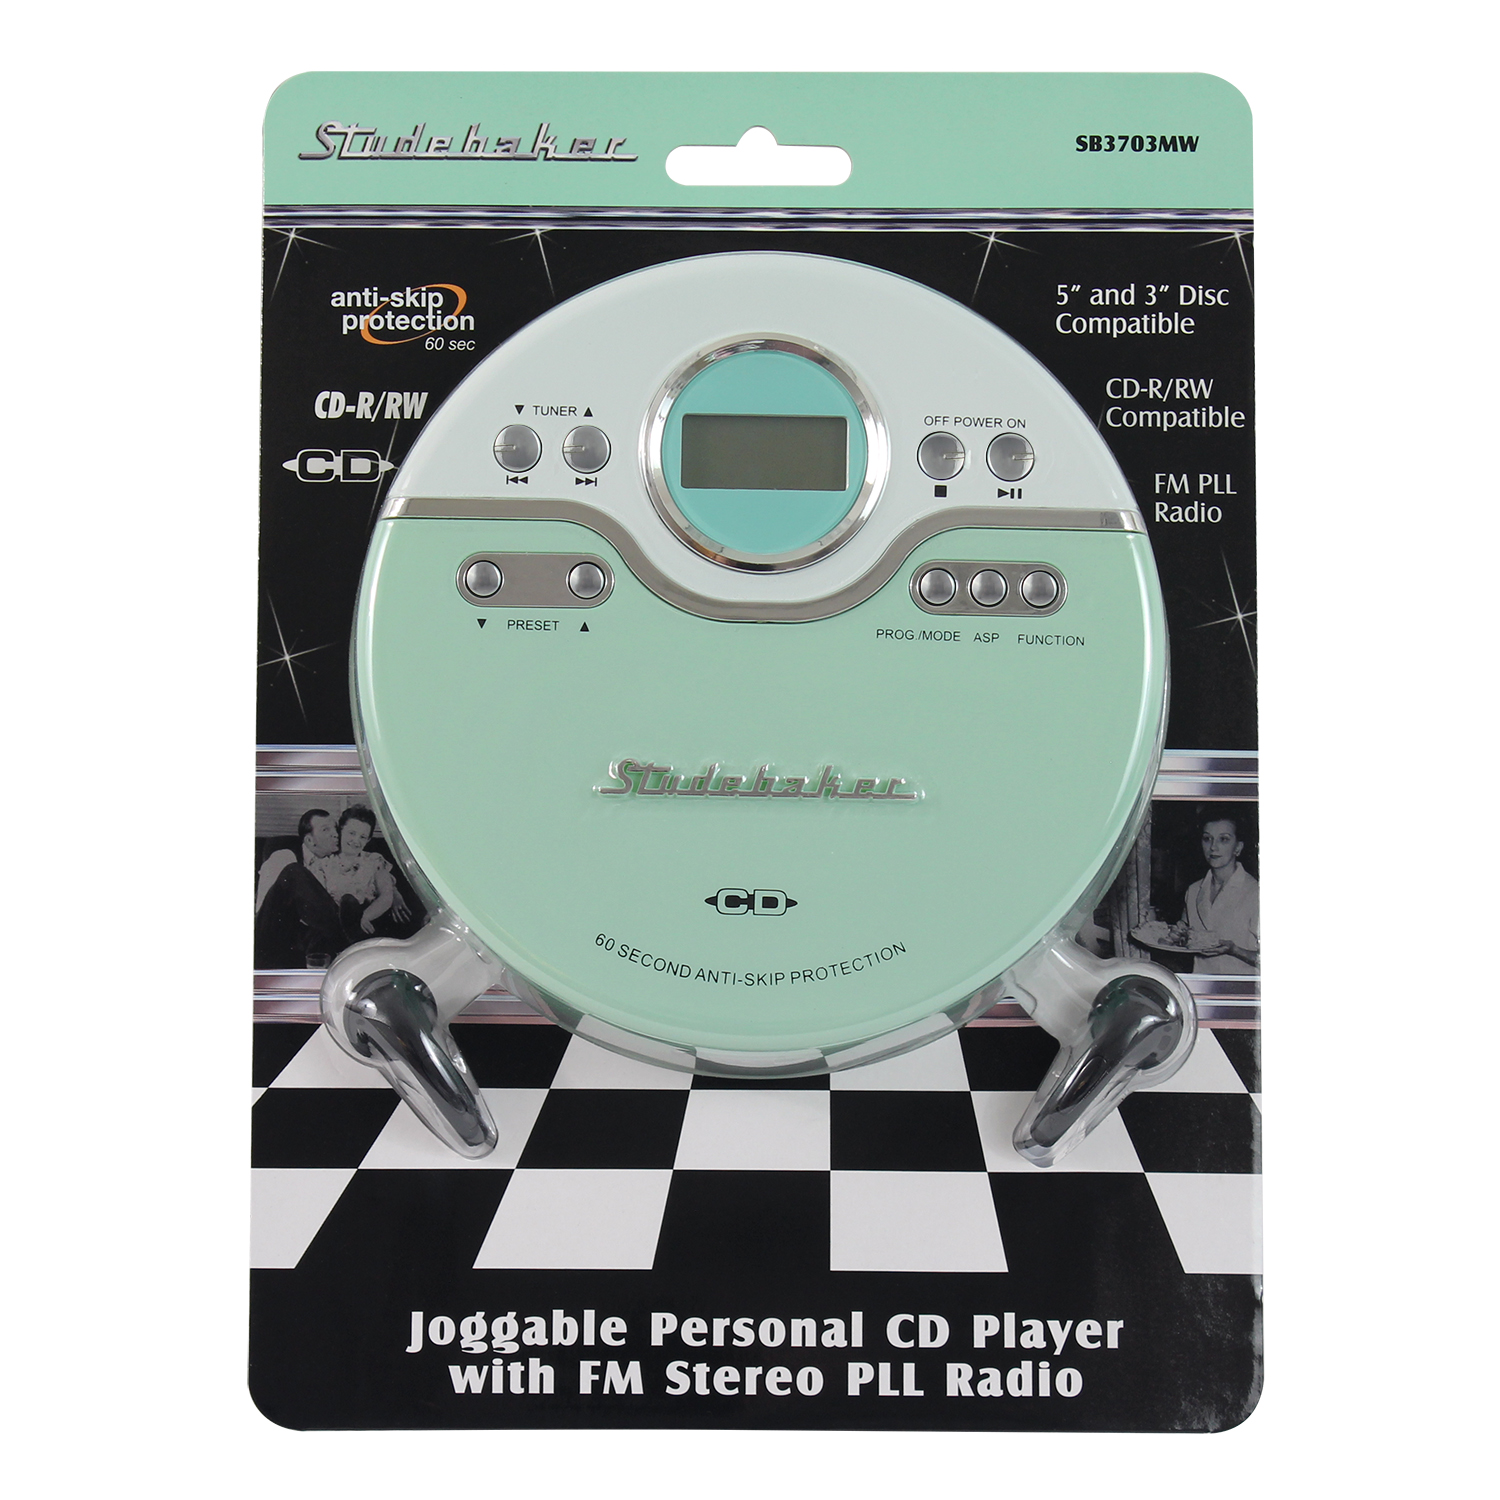 Studebaker Sb3703mw Personal Jogging CD Player with FM Pll Radio (Mint Green/white) - image 3 of 5